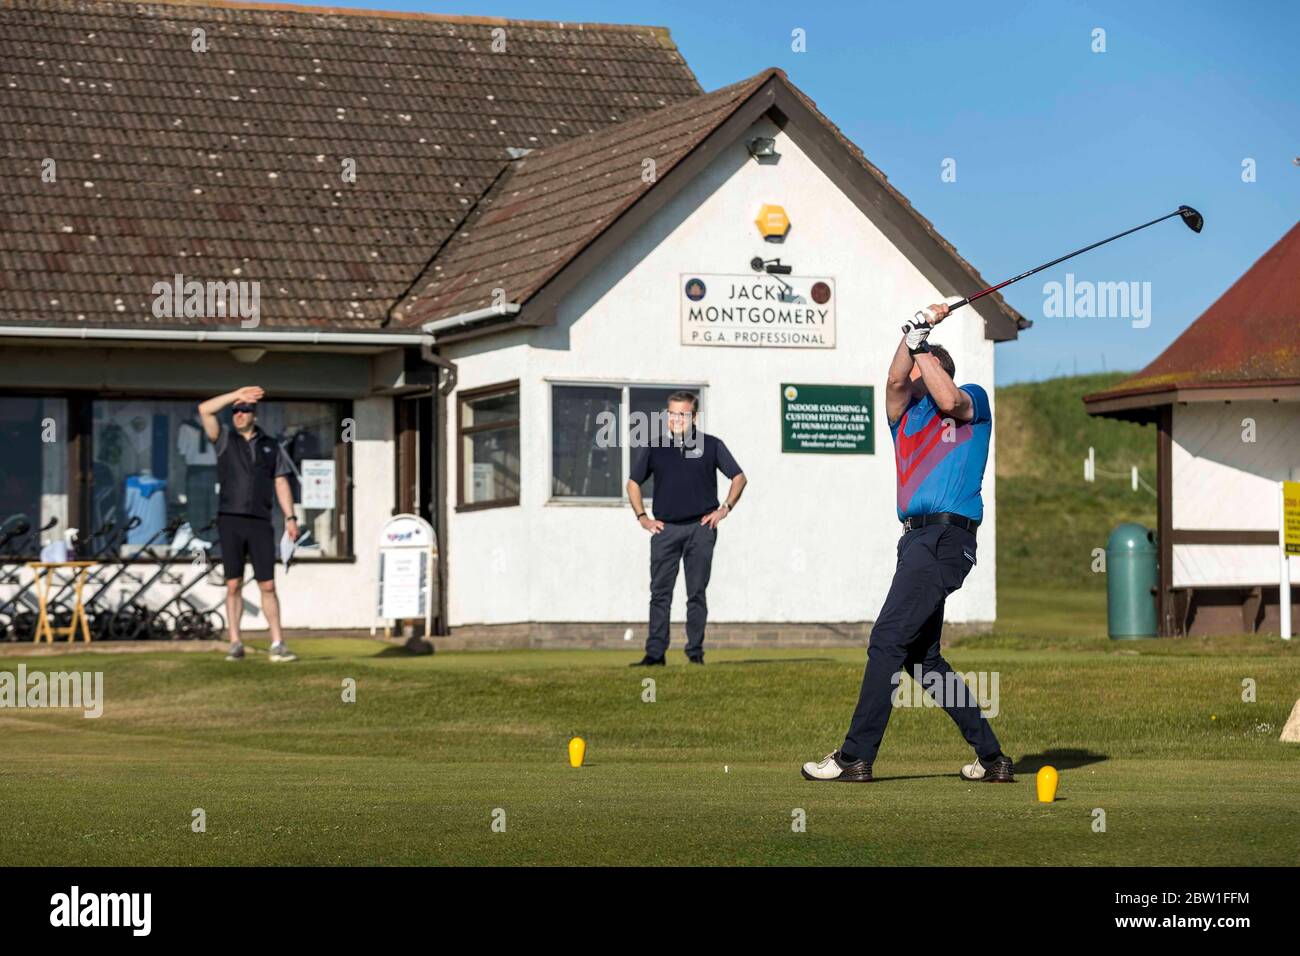 Dunbar, United Kingdom. 29 May, 2020 Pictured: Mike Gilmartin in the first  group to tee off at Dunbar Golf Club. The first golfers, Steven Miller and  Mike Gilmartin, tee off at Dunbar